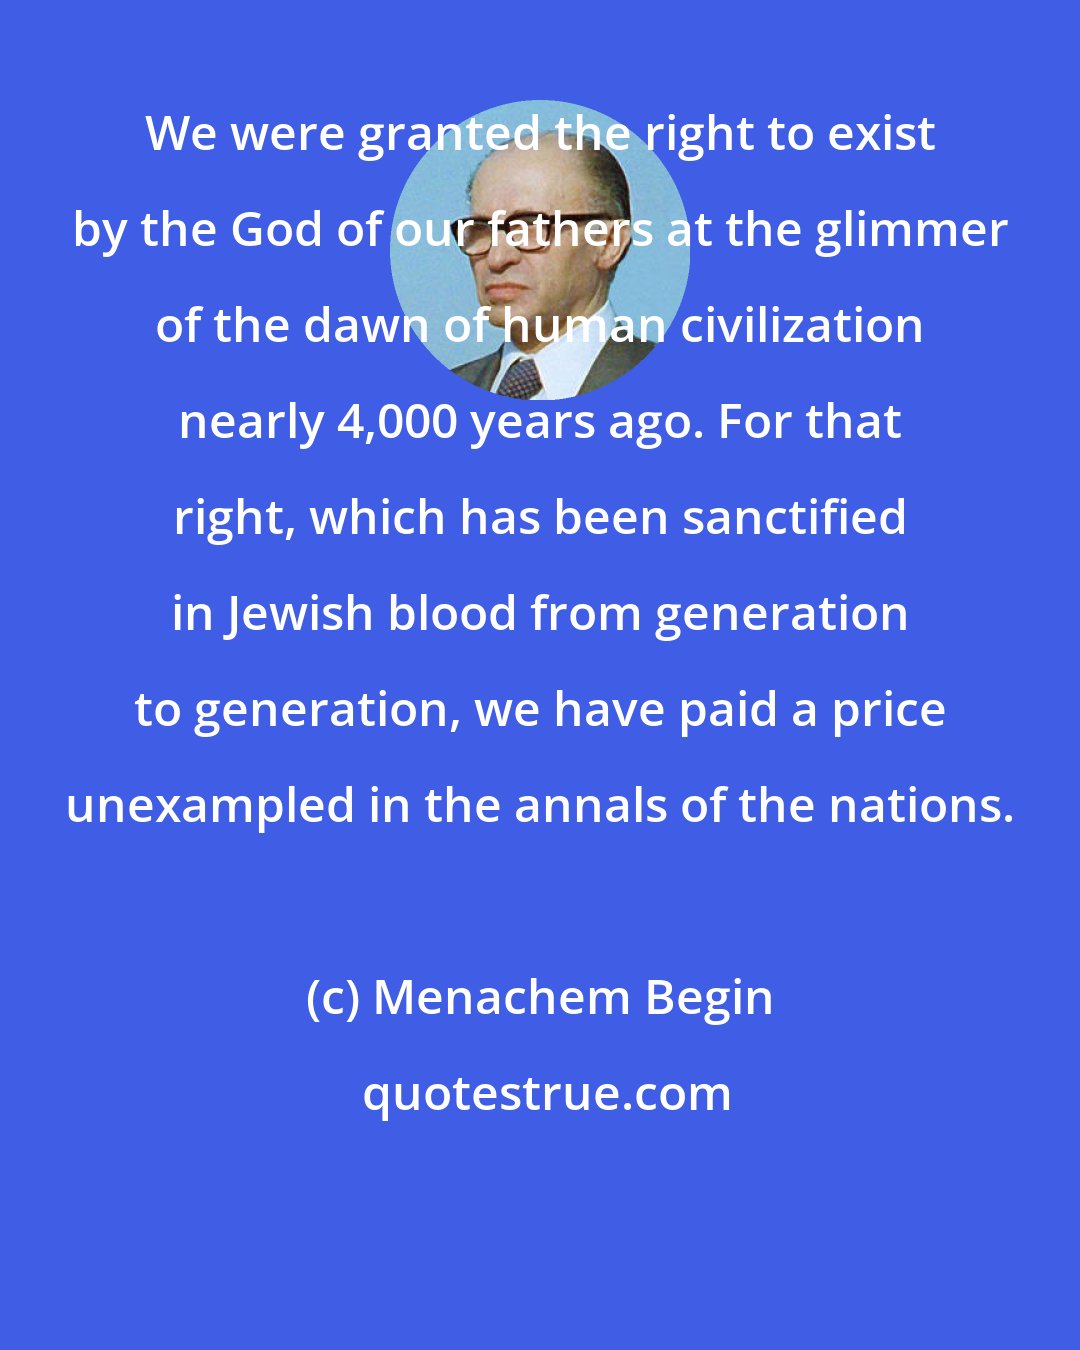 Menachem Begin: We were granted the right to exist by the God of our fathers at the glimmer of the dawn of human civilization nearly 4,000 years ago. For that right, which has been sanctified in Jewish blood from generation to generation, we have paid a price unexampled in the annals of the nations.